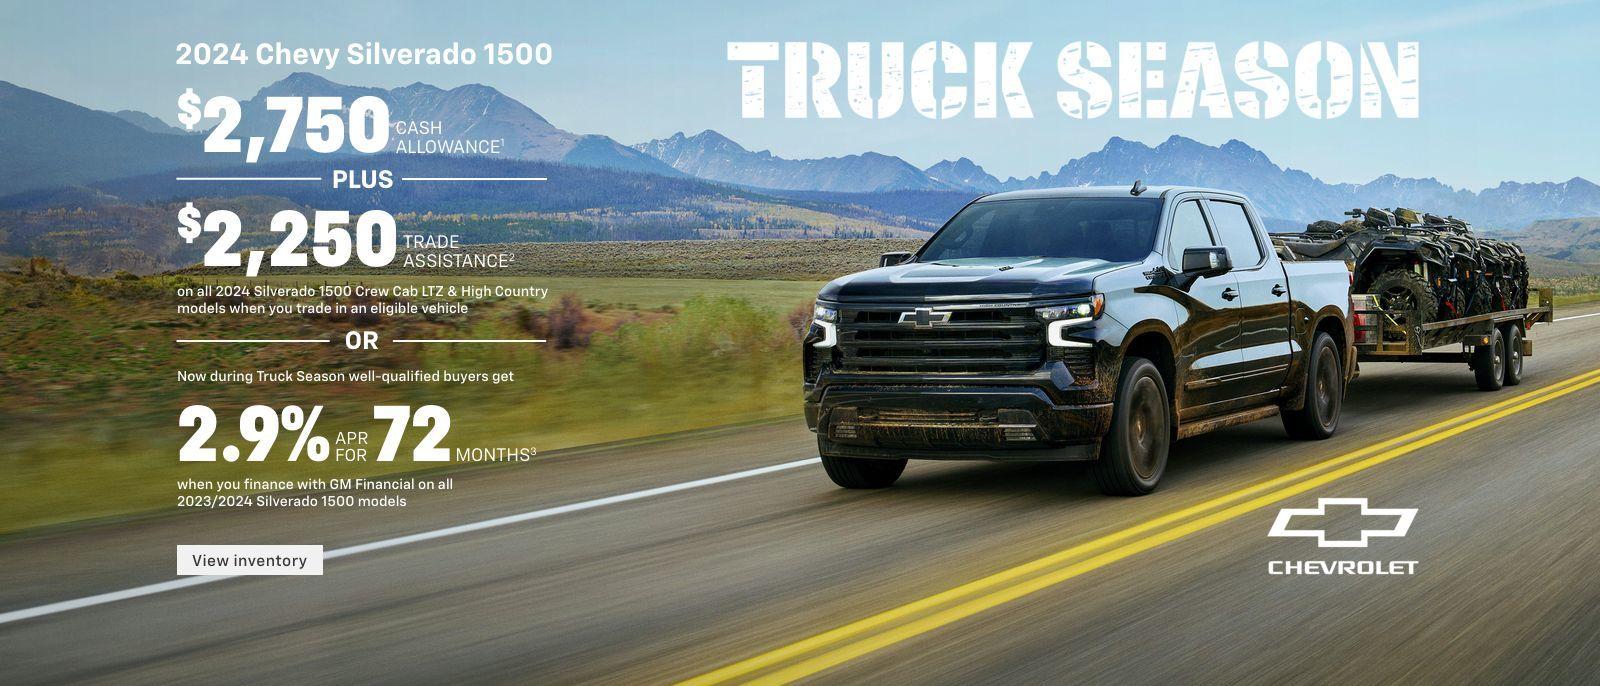 $2,750 cash allowance. Plus, $2,250 trade assistance on all 2024 Silverado 1500 Crew Cab LTZ & High Country models when you trade in an eligible vehicle. Or, now during Truck Season well-qualified buyers get 1.9% APR for 72 months when you finance with GM Financial on all 2023/2024 Silverado 1500 models.